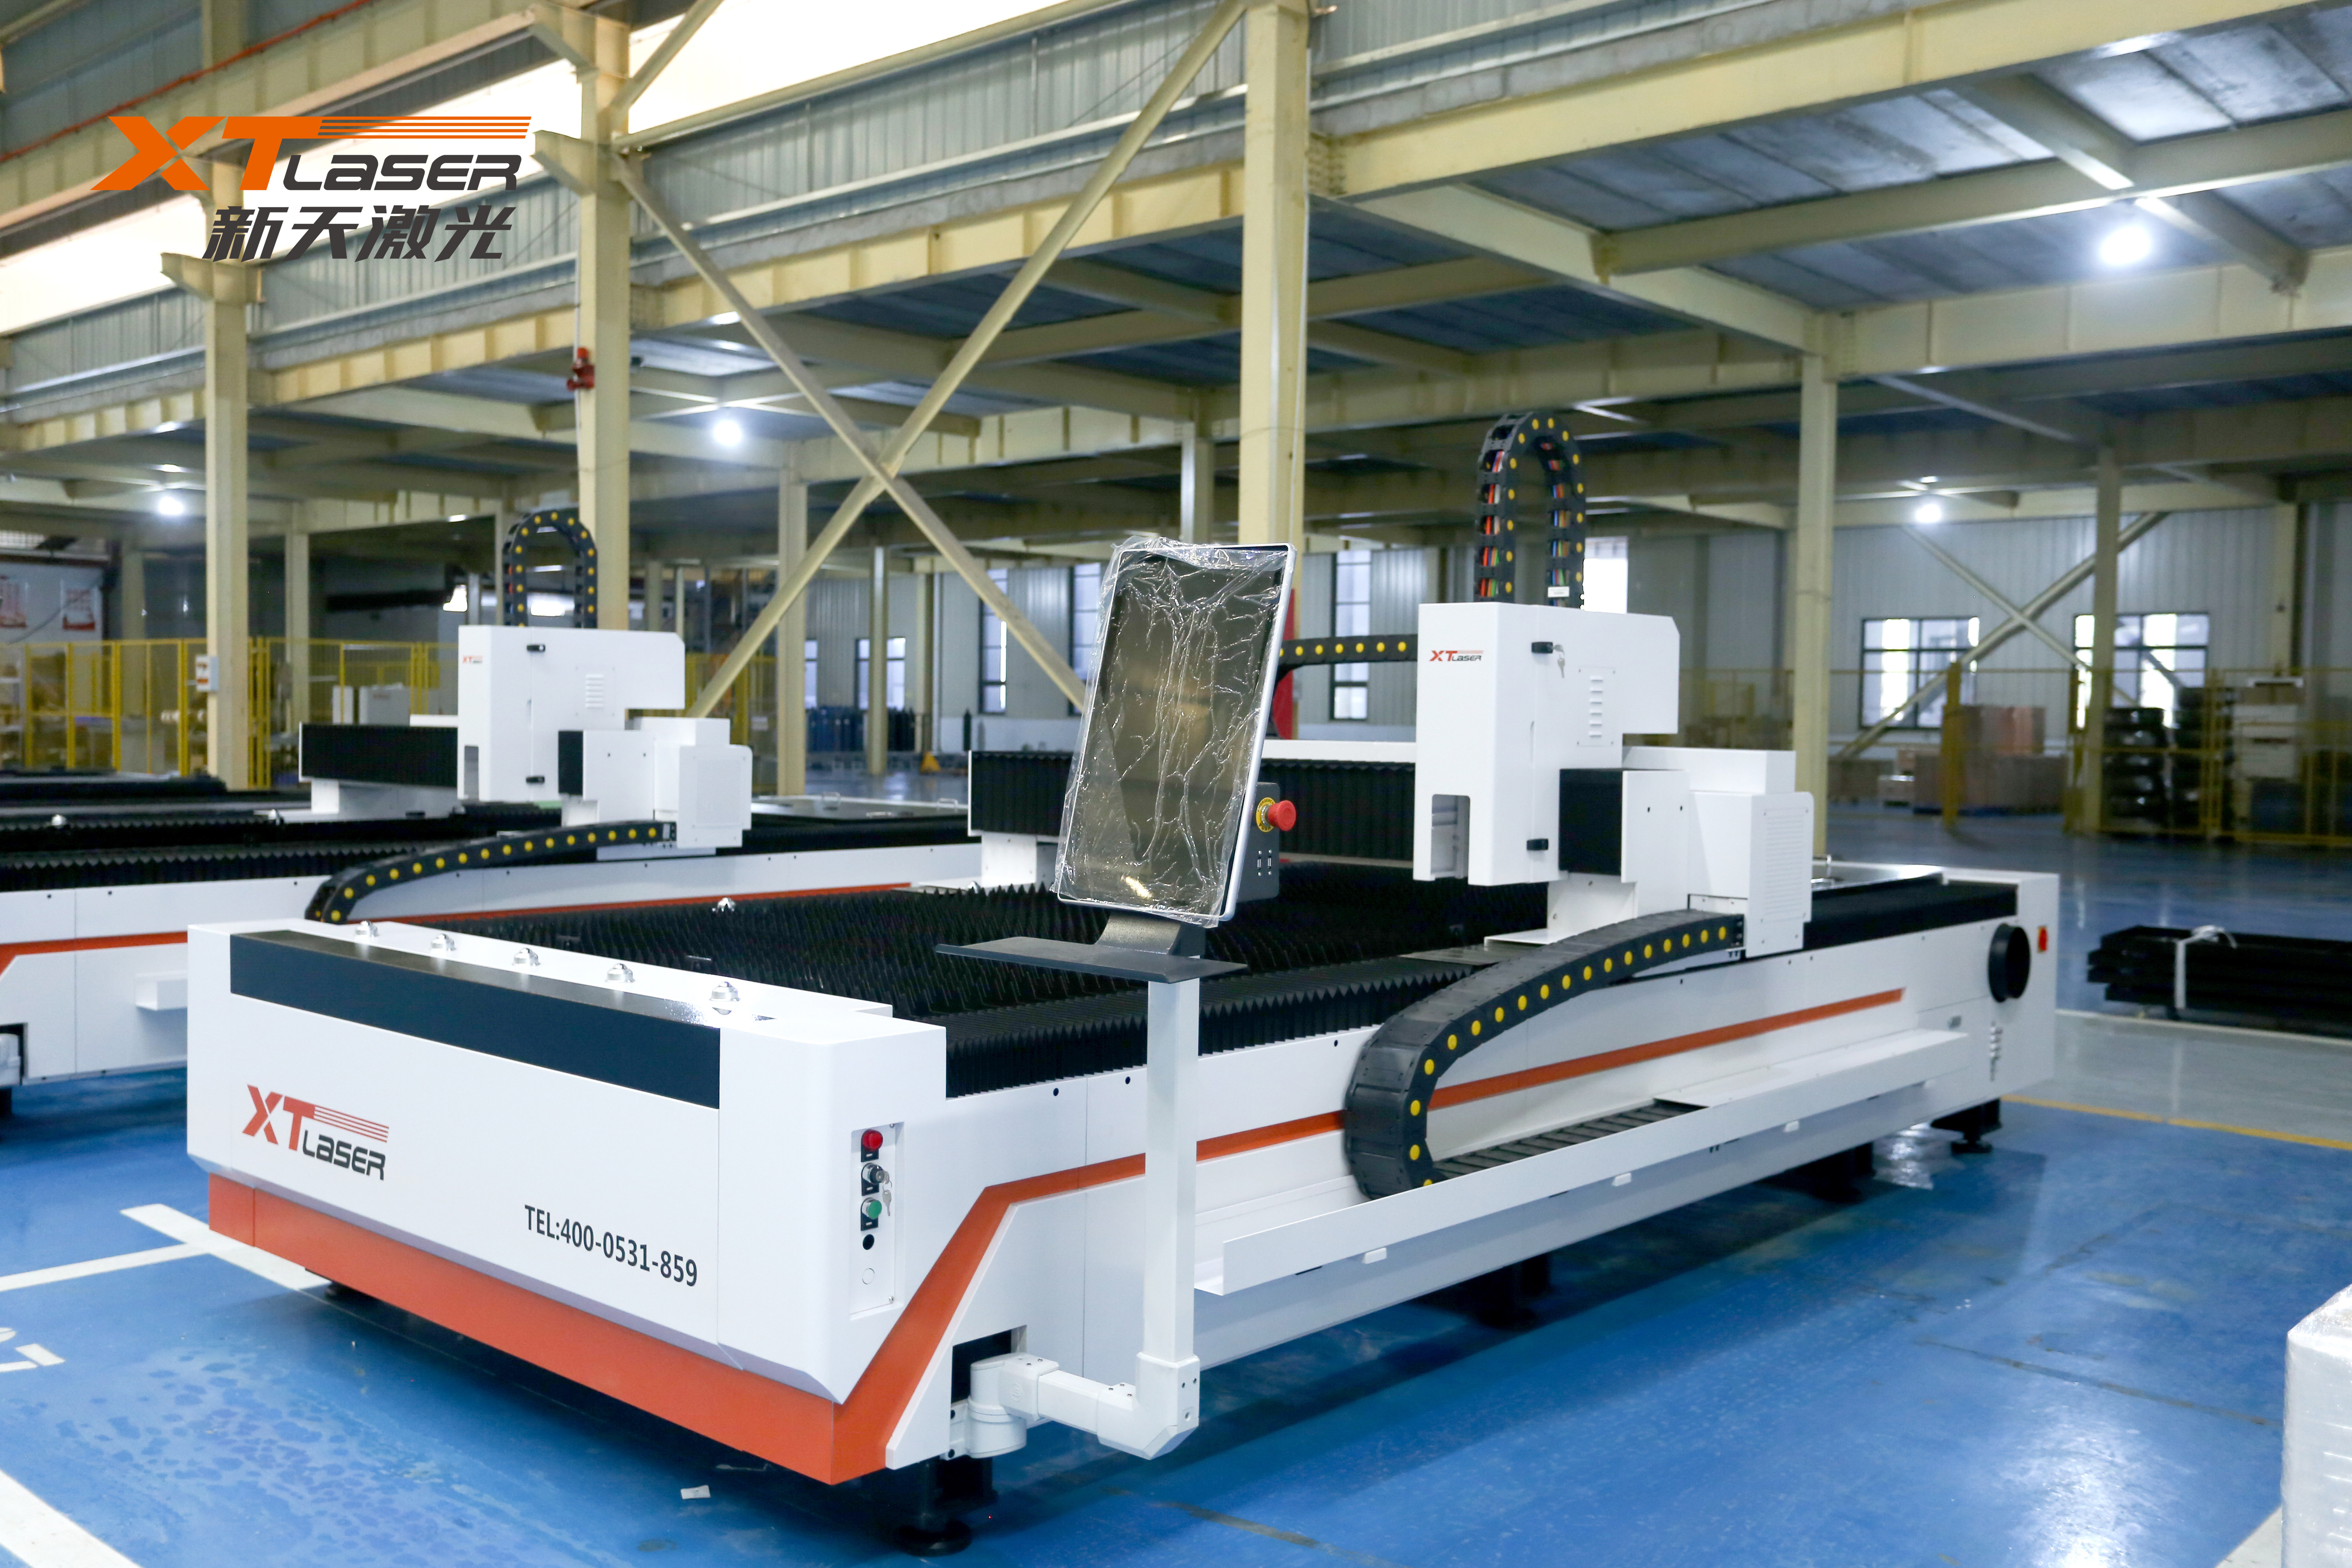 Laser cutting machines can be applied in food machinery manufacturing